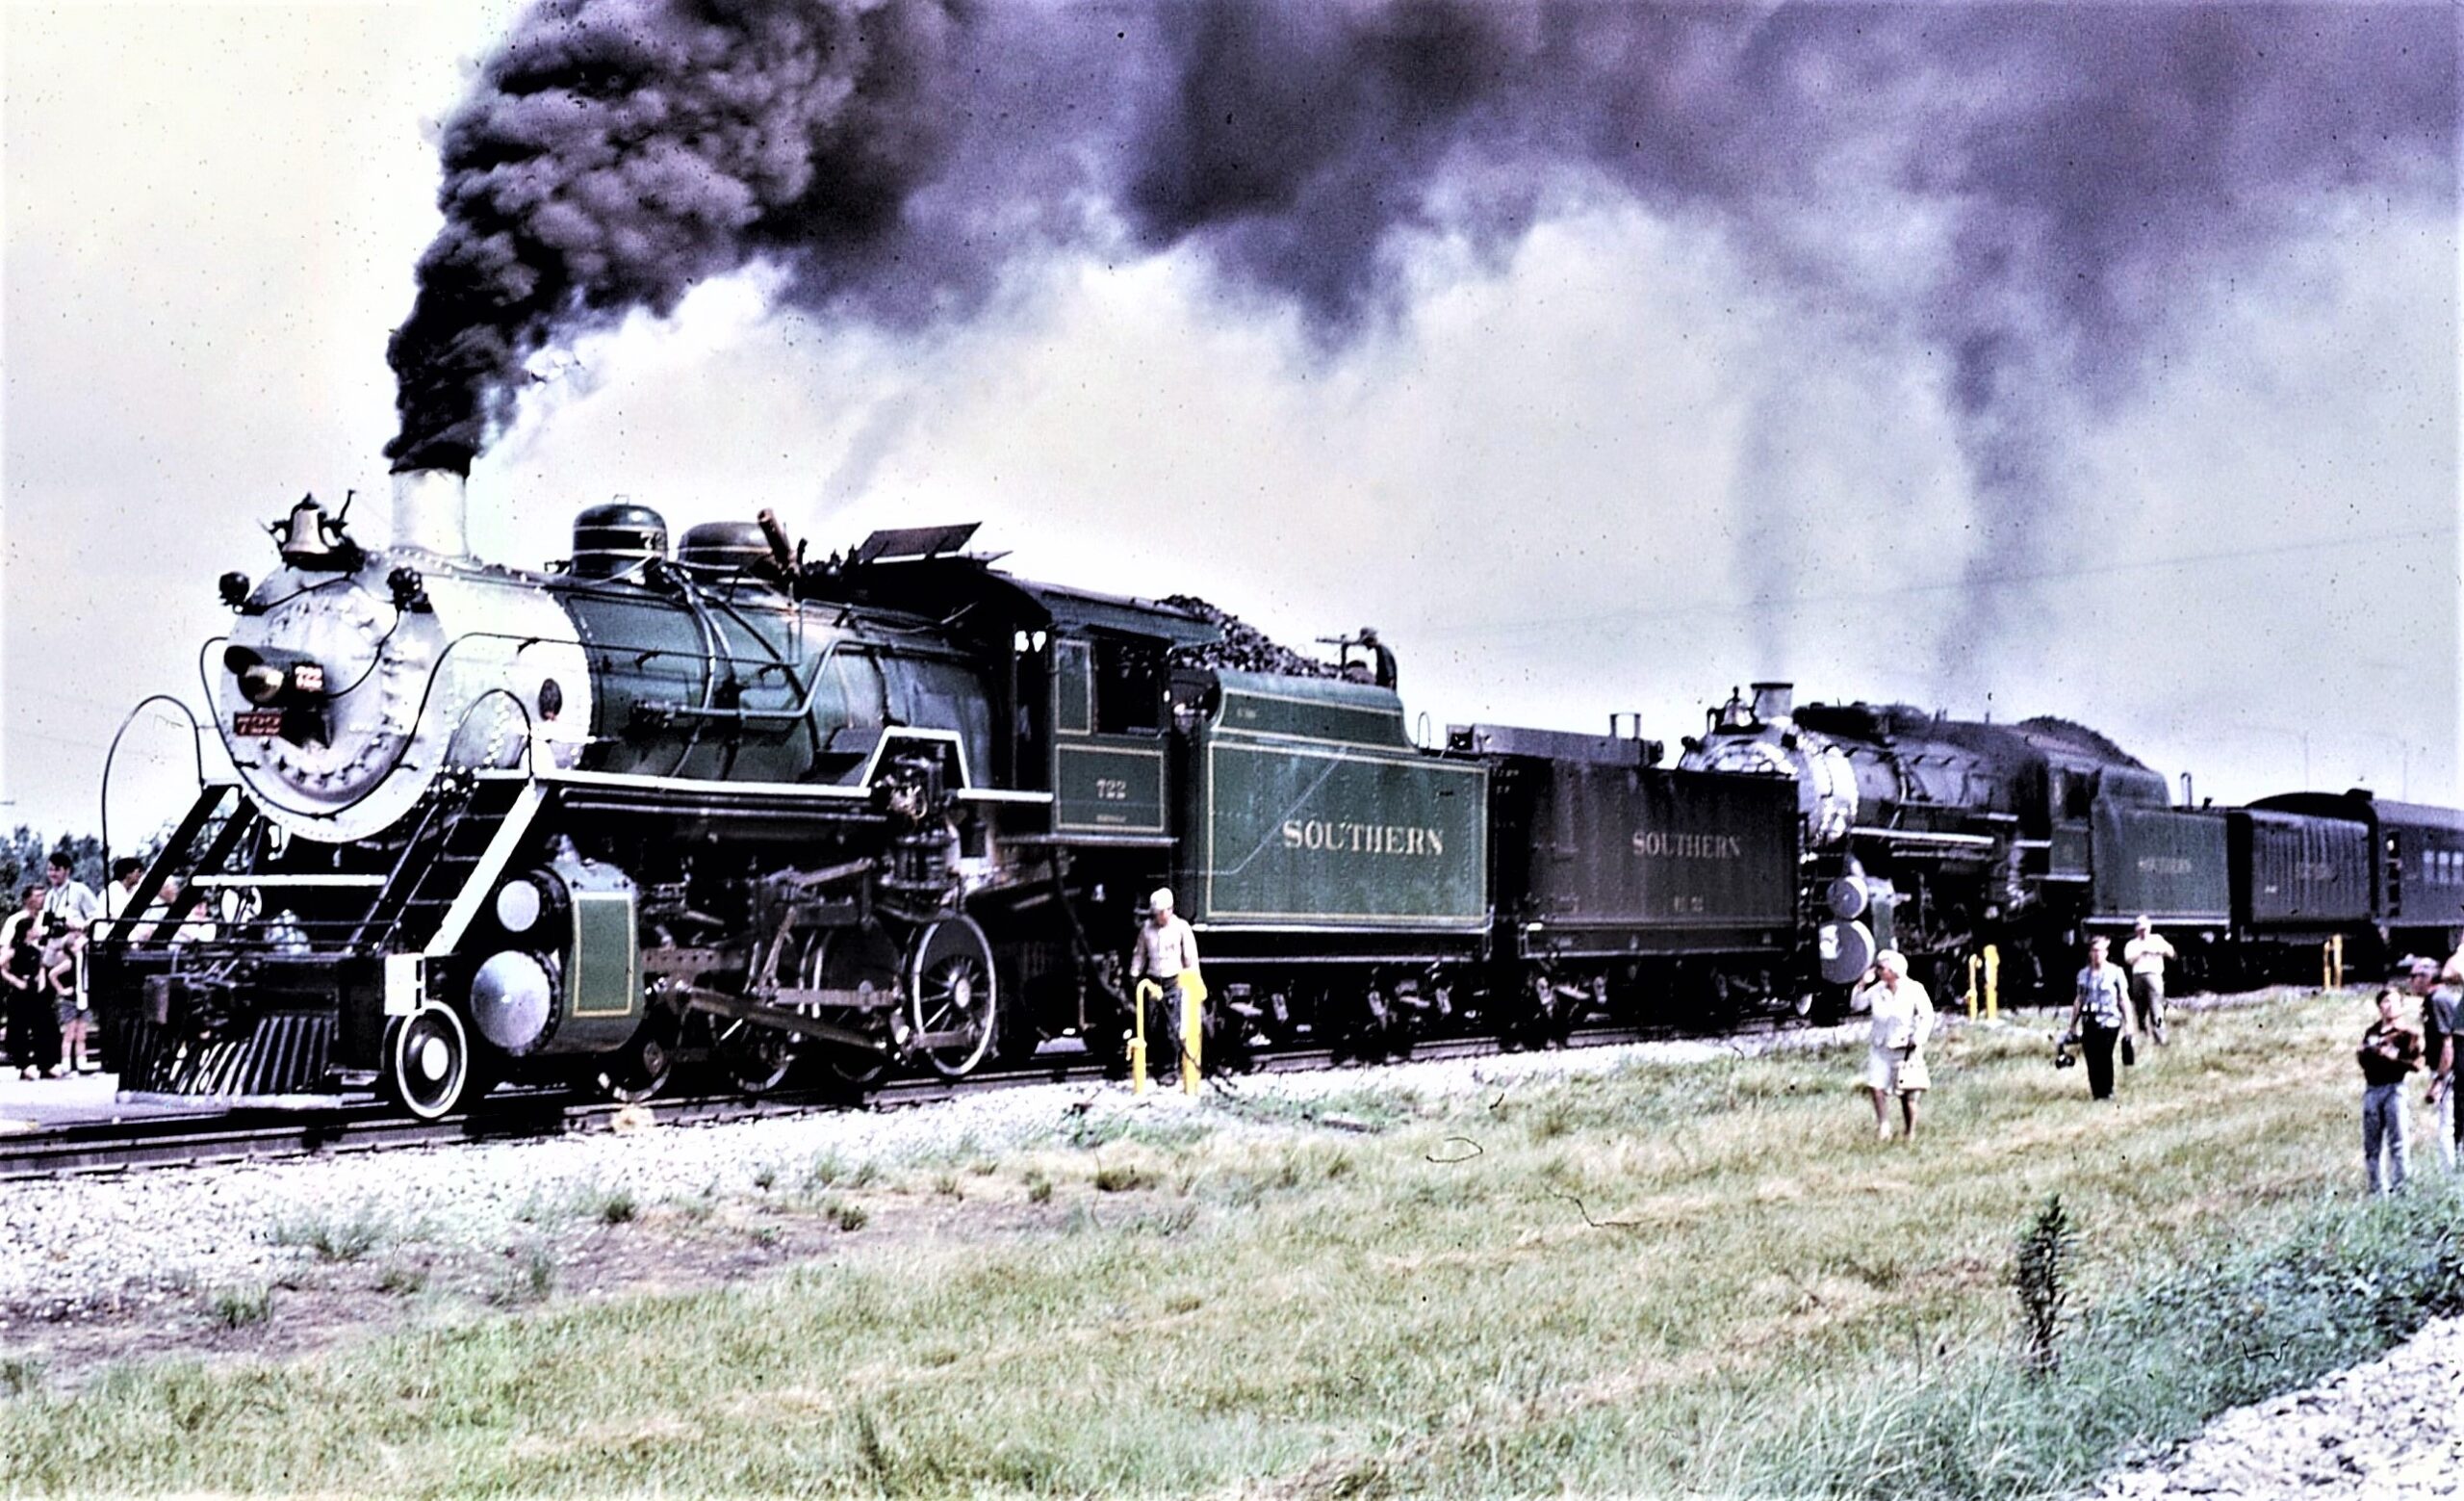 Southern Railway | Savannah, Georgia | Class 2-8-0 #722 and #4501 steam locomotives | Special NRHS Convention Excursion Train | September 1970 | Larry Steingarten photograph